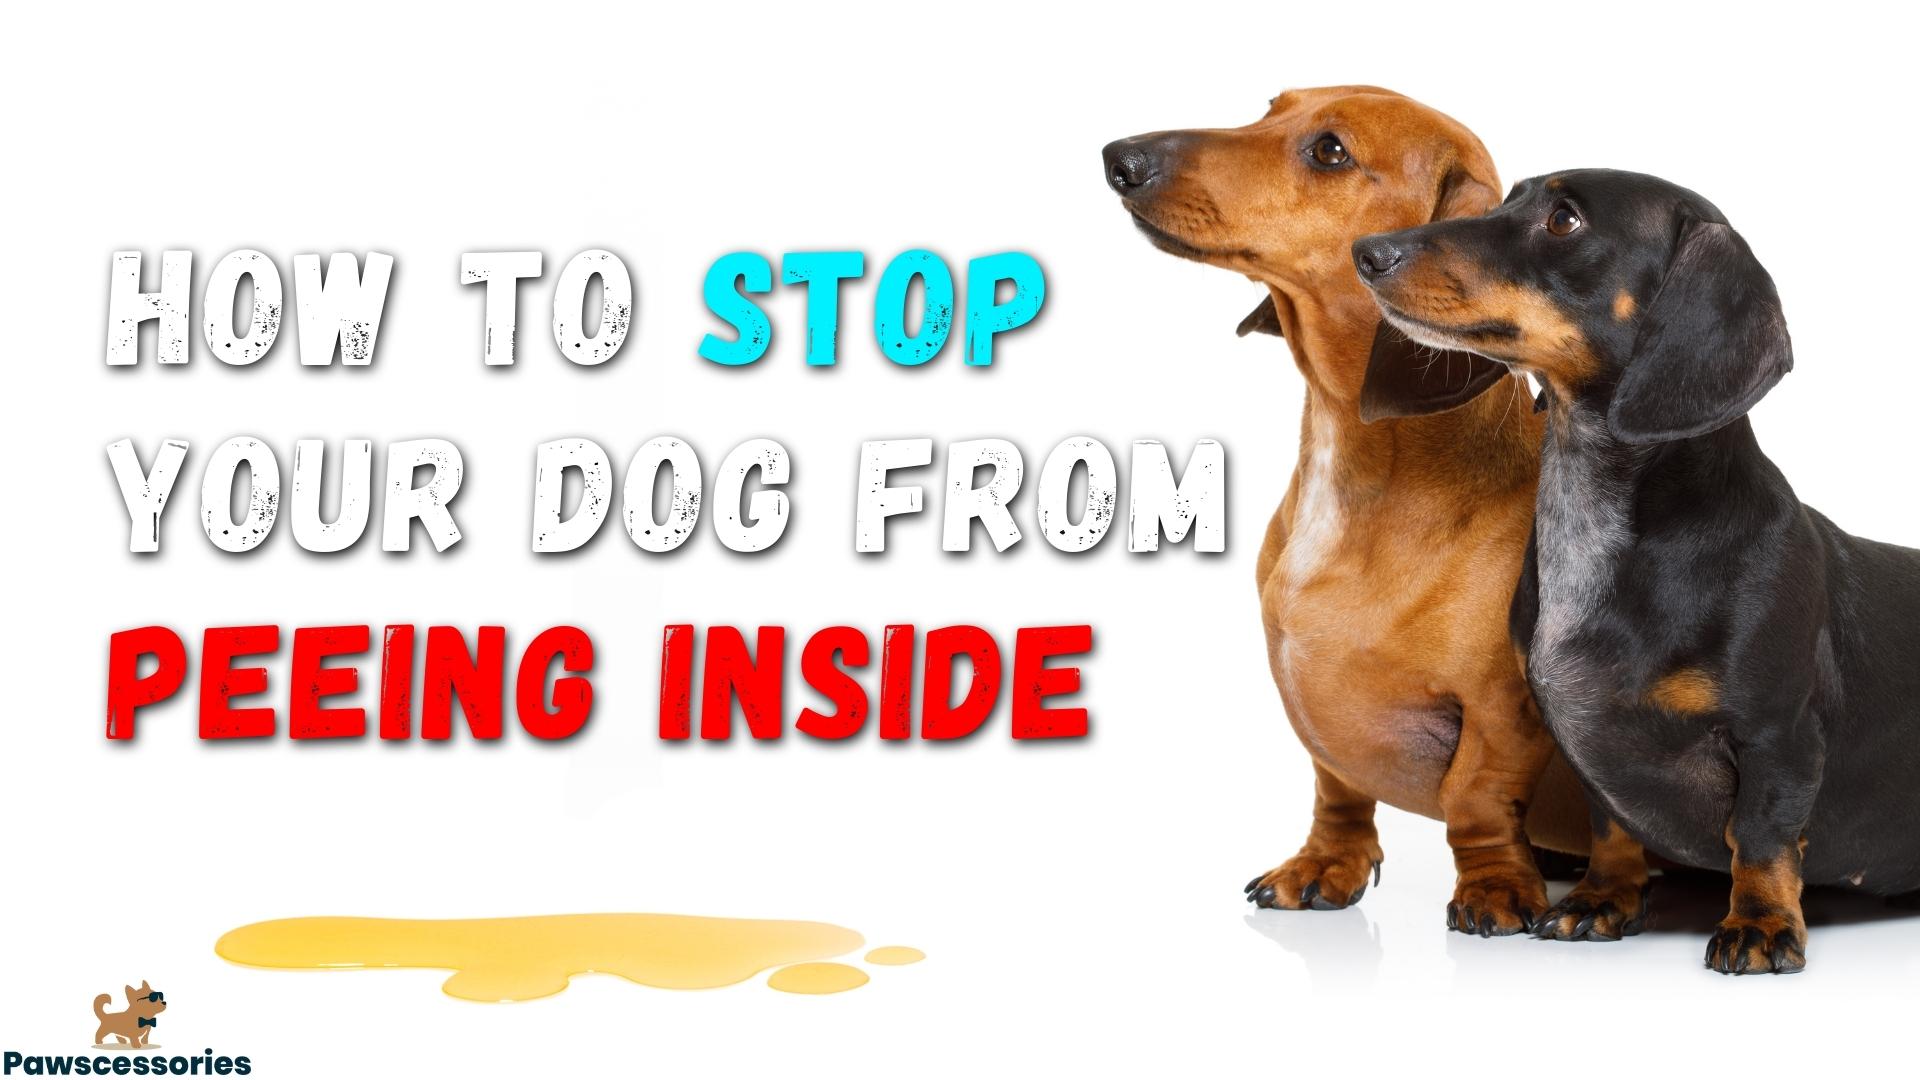 12 Tips To Get Your Dog To Stop Peeing Inside (#5 Works)